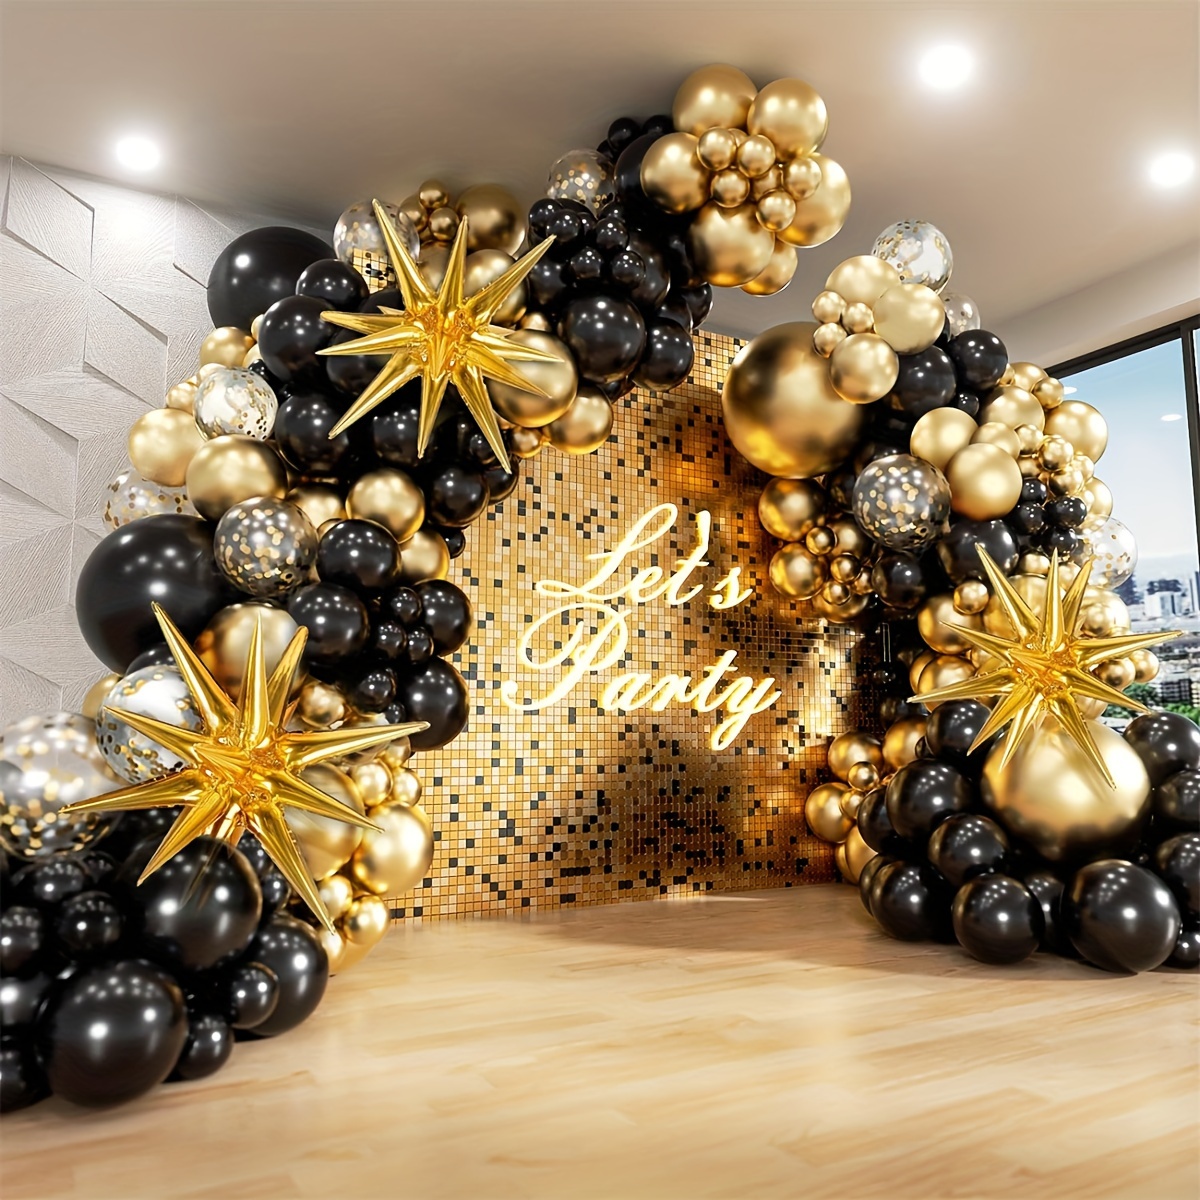 

132pcs Black And Golden Balloon Garland Arch Kit With Starburst Foil Balloons, 5 10 12 18 Inch Black Golden Latex Balloons For New Year Wedding Anniversary Birthday Party Wedding Decoration